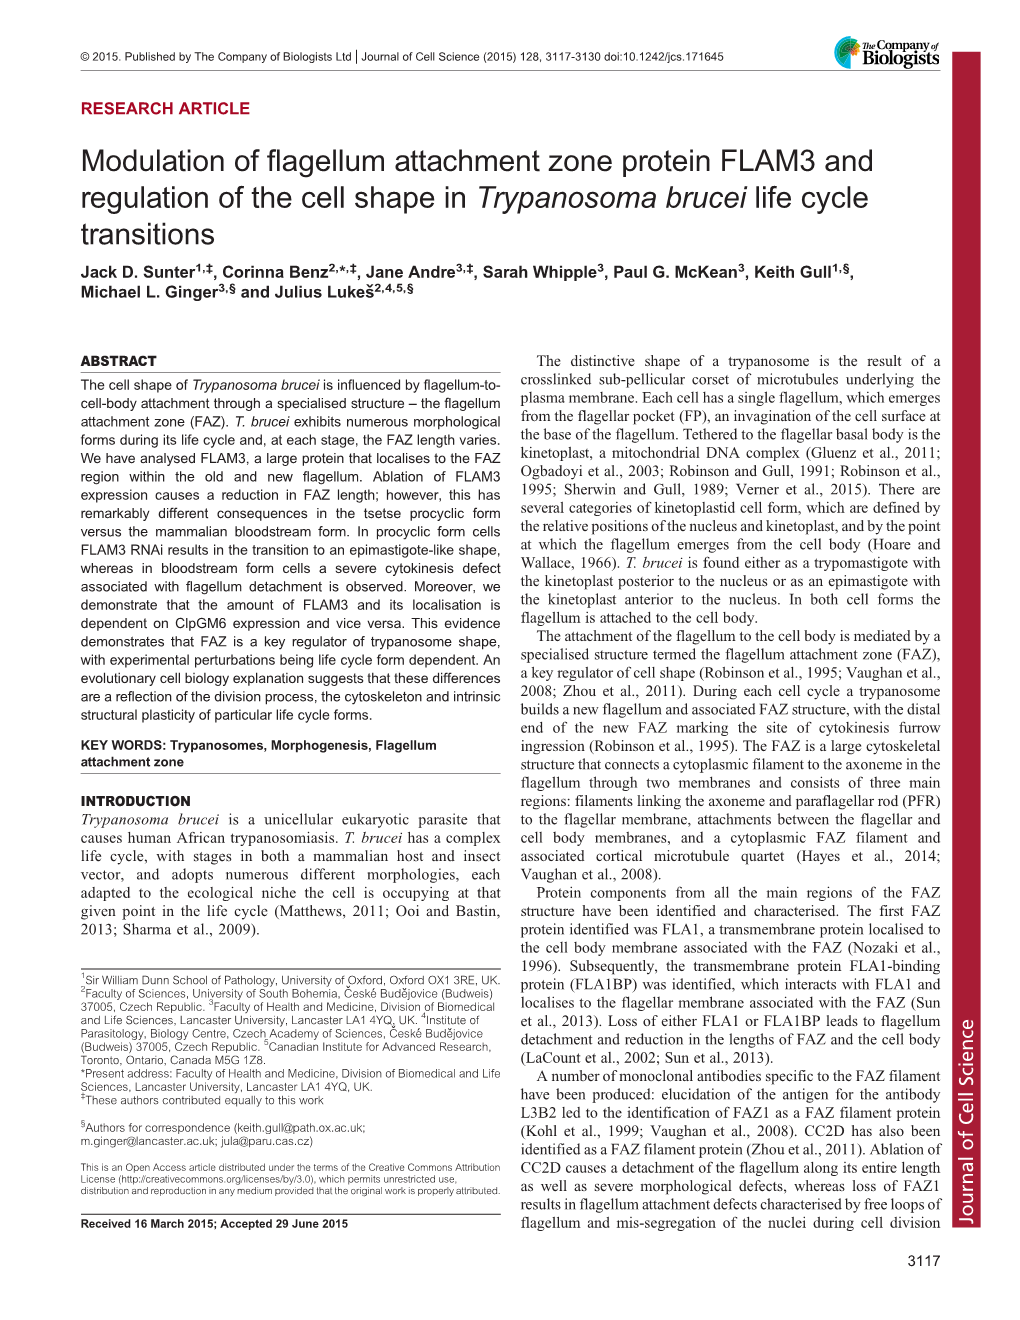 Modulation of Flagellum Attachment Zone Protein FLAM3 and Regulation of the Cell Shape in Trypanosoma Brucei Life Cycle Transitions Jack D